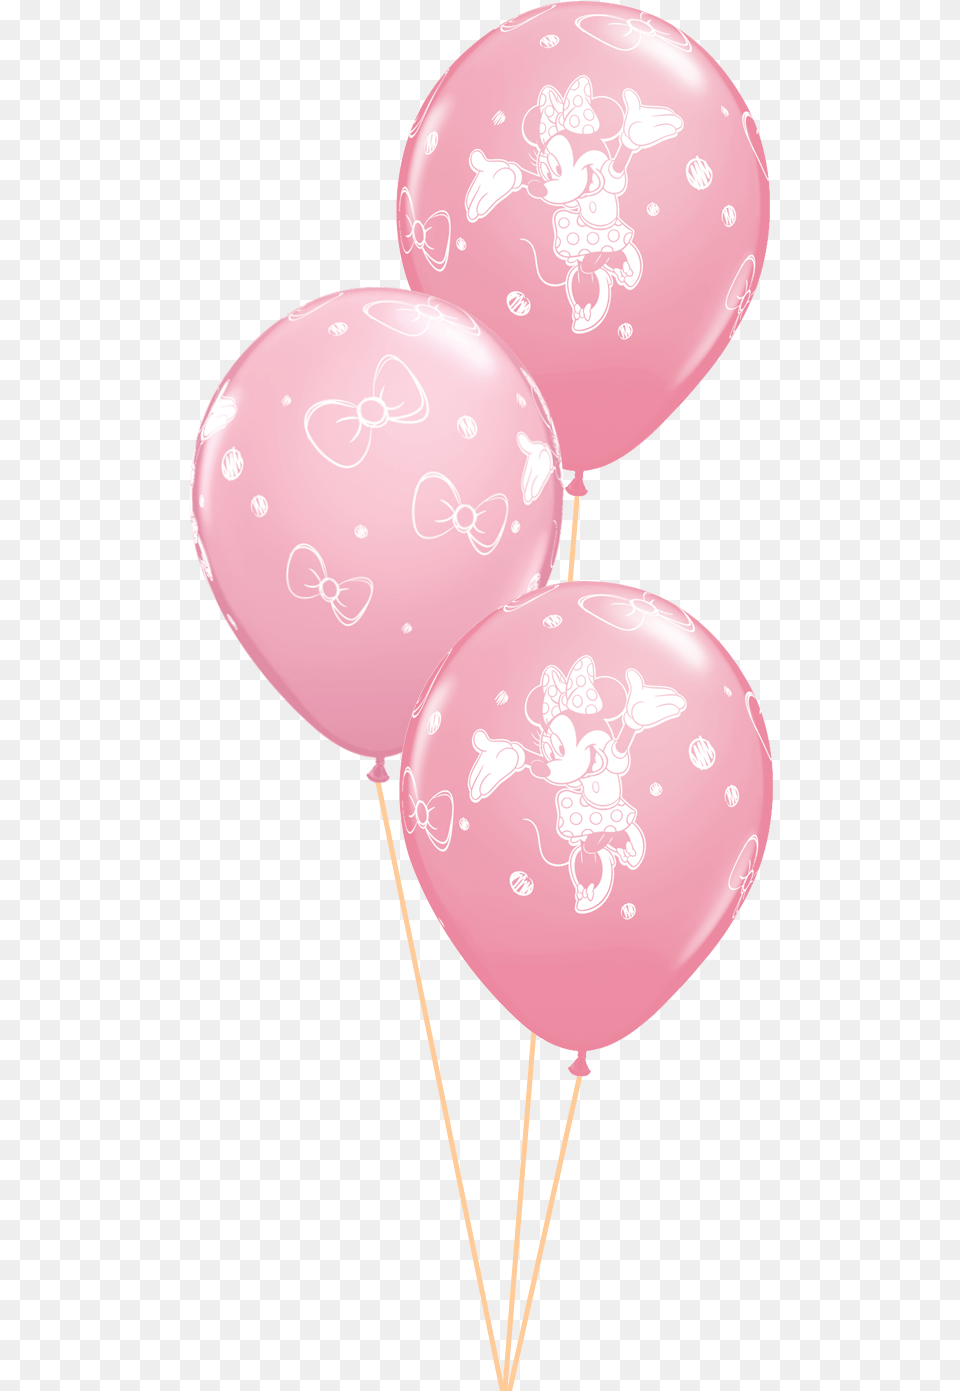 Pink Minnie Mouse Balloons Hd Uokplrs Minnie Mouse Birthday Balloons, Balloon Free Png Download